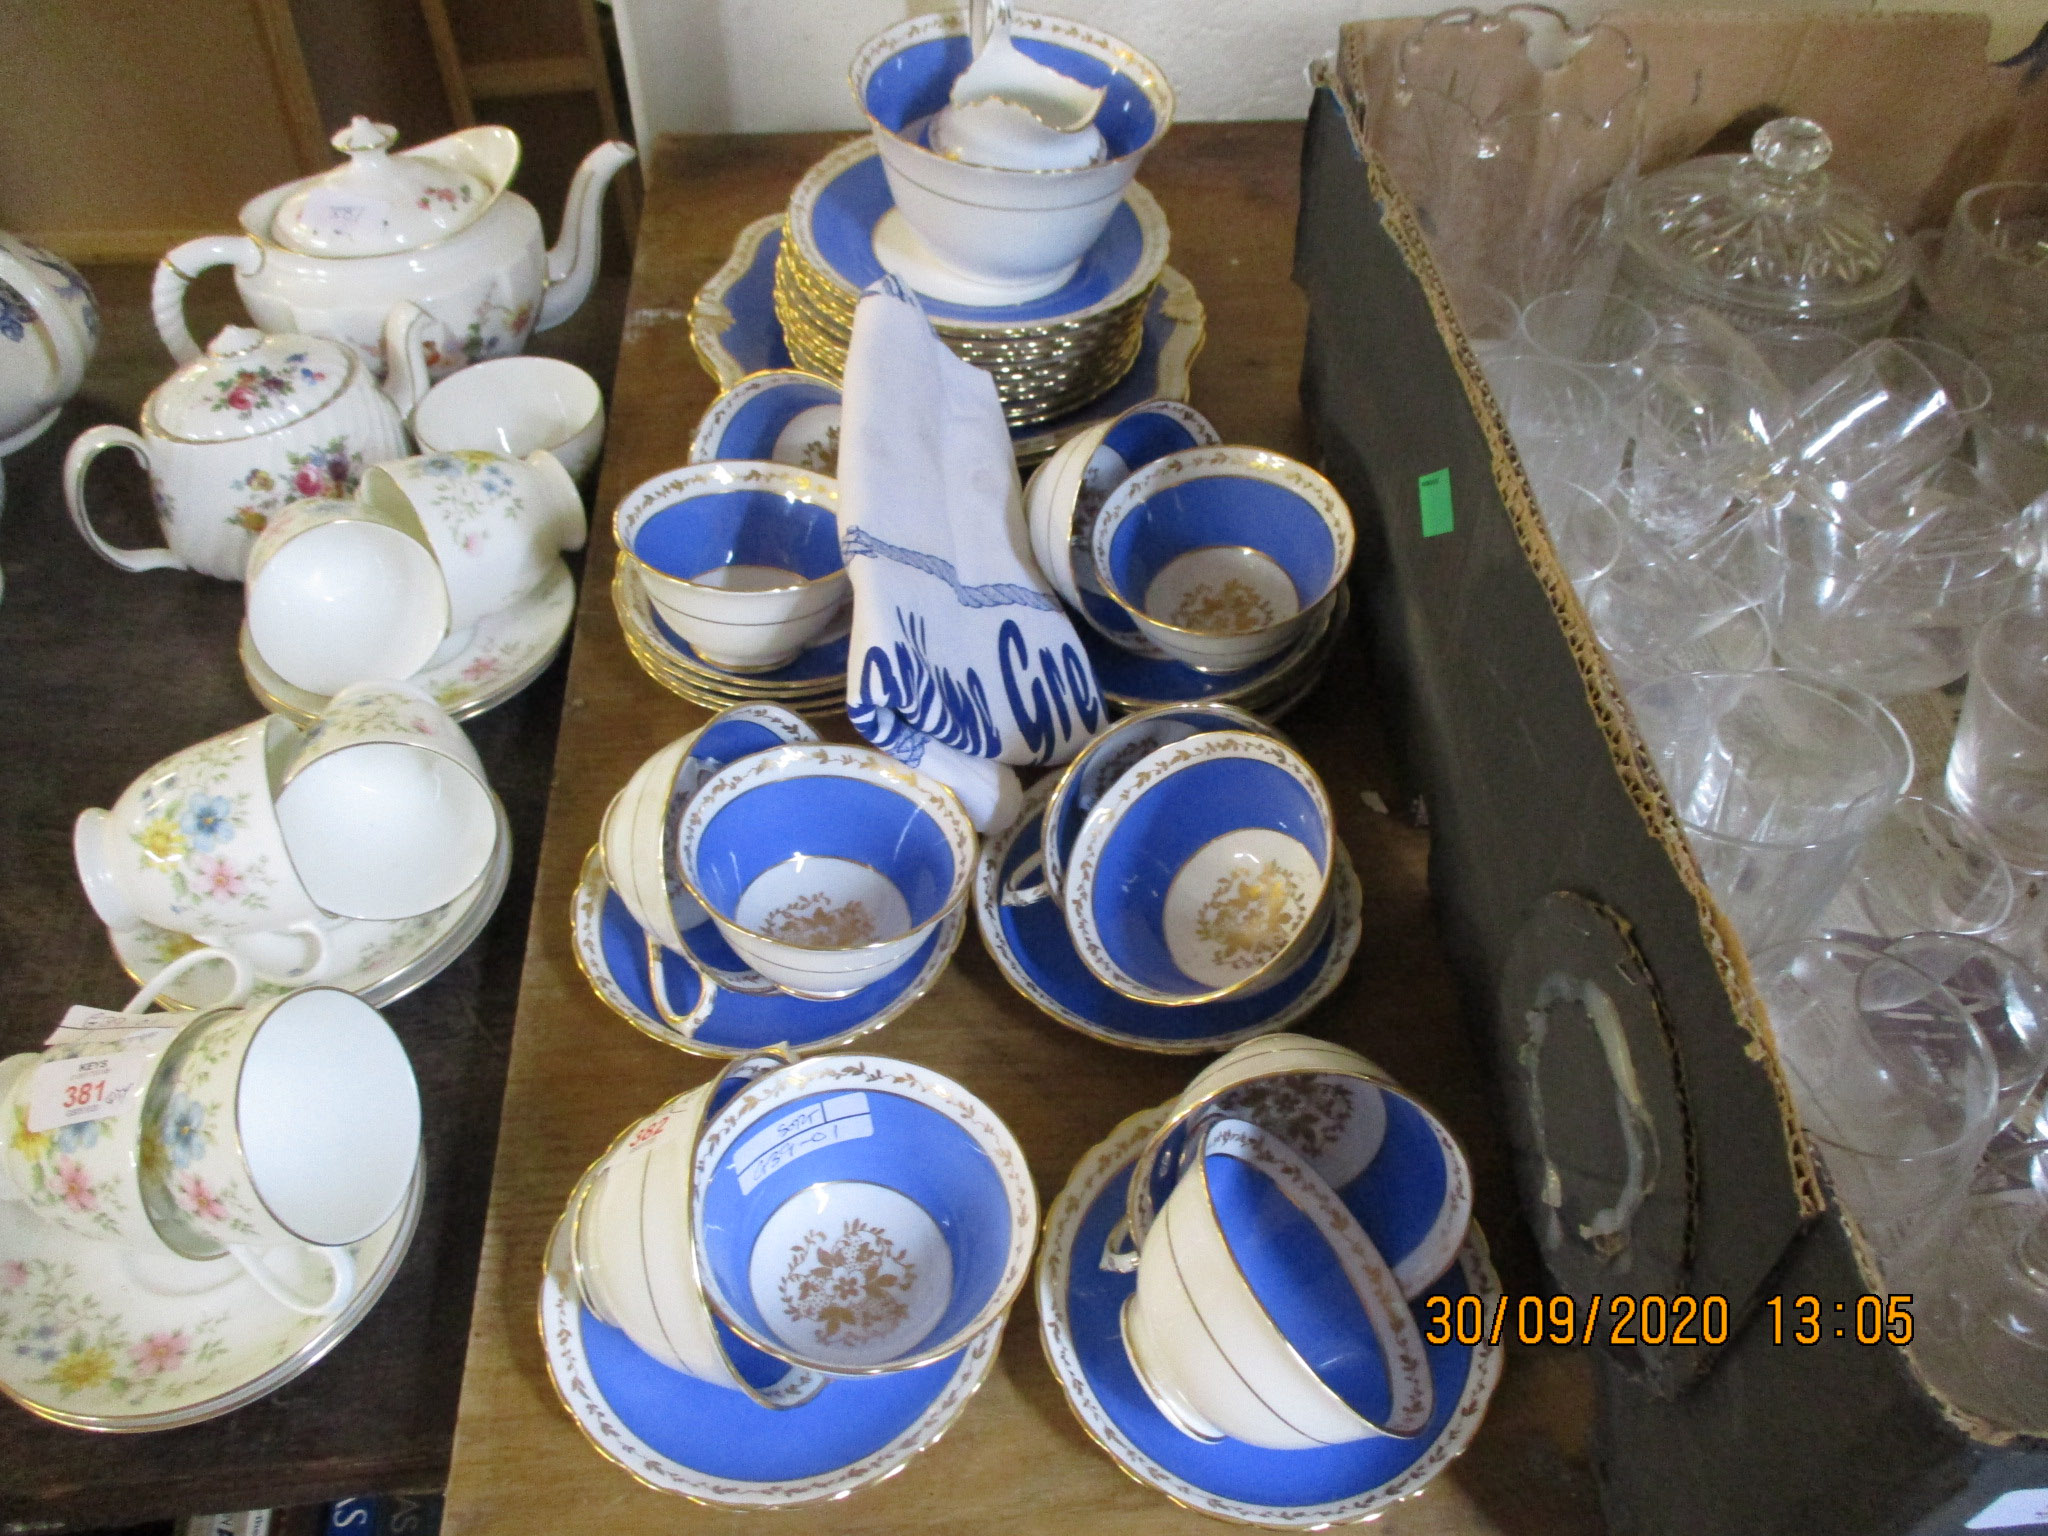 GROUP OF 19TH CENTURY TEA WARES WITH BLUE AND GILT DESIGN COMPRISING CUPS AND SAUCERS, SIDE PLATES